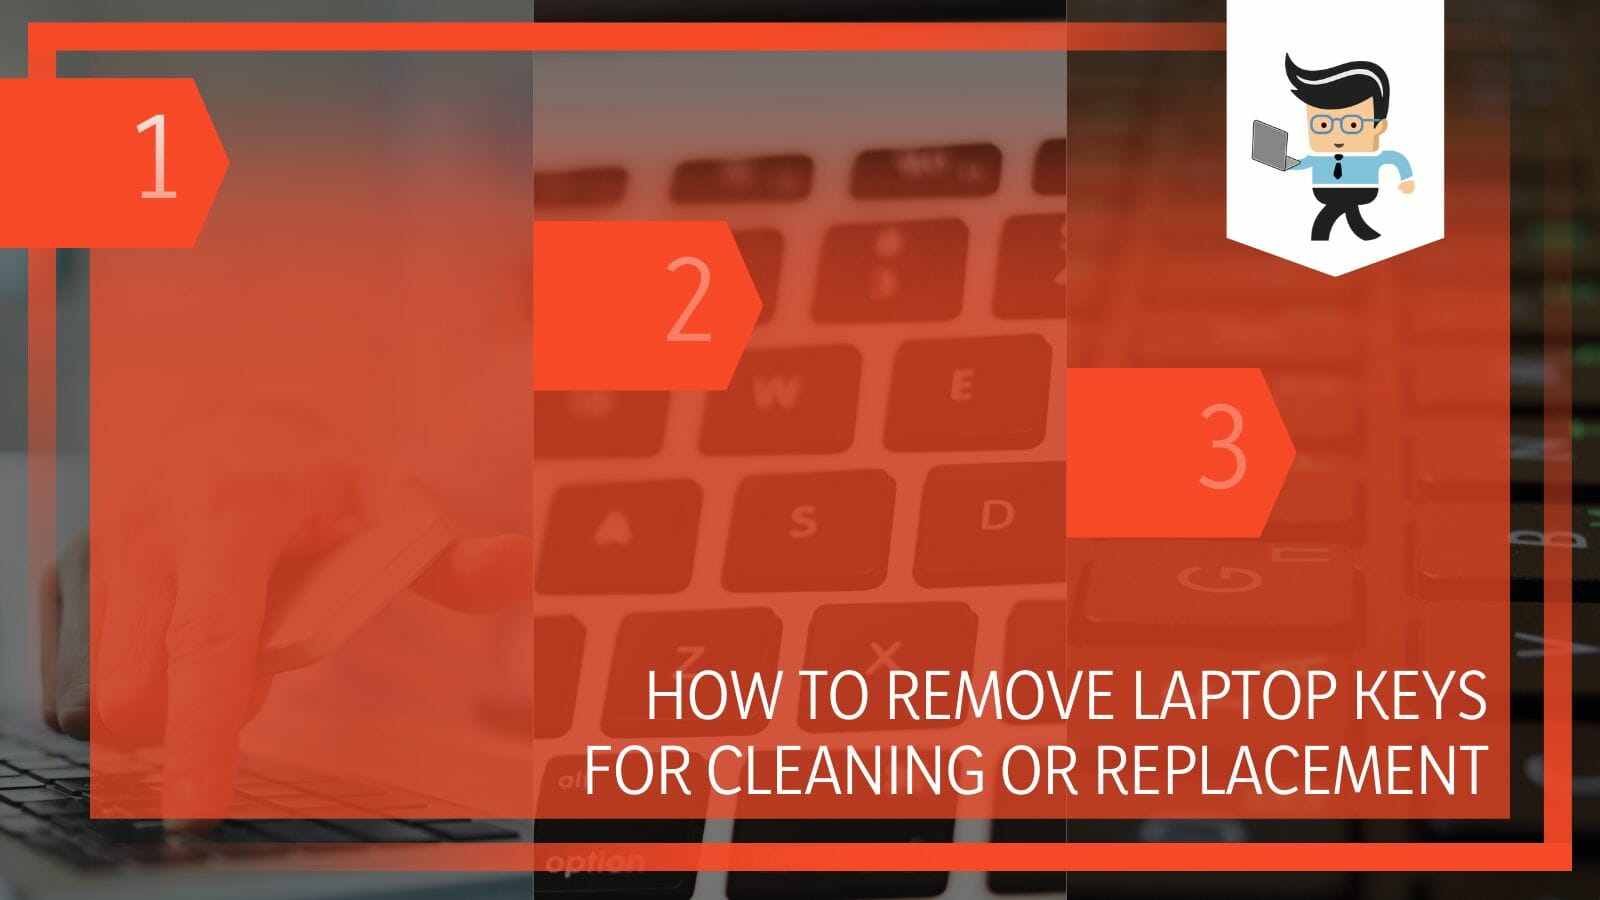 How To Remove Laptop Keys for Cleaning or Replacement